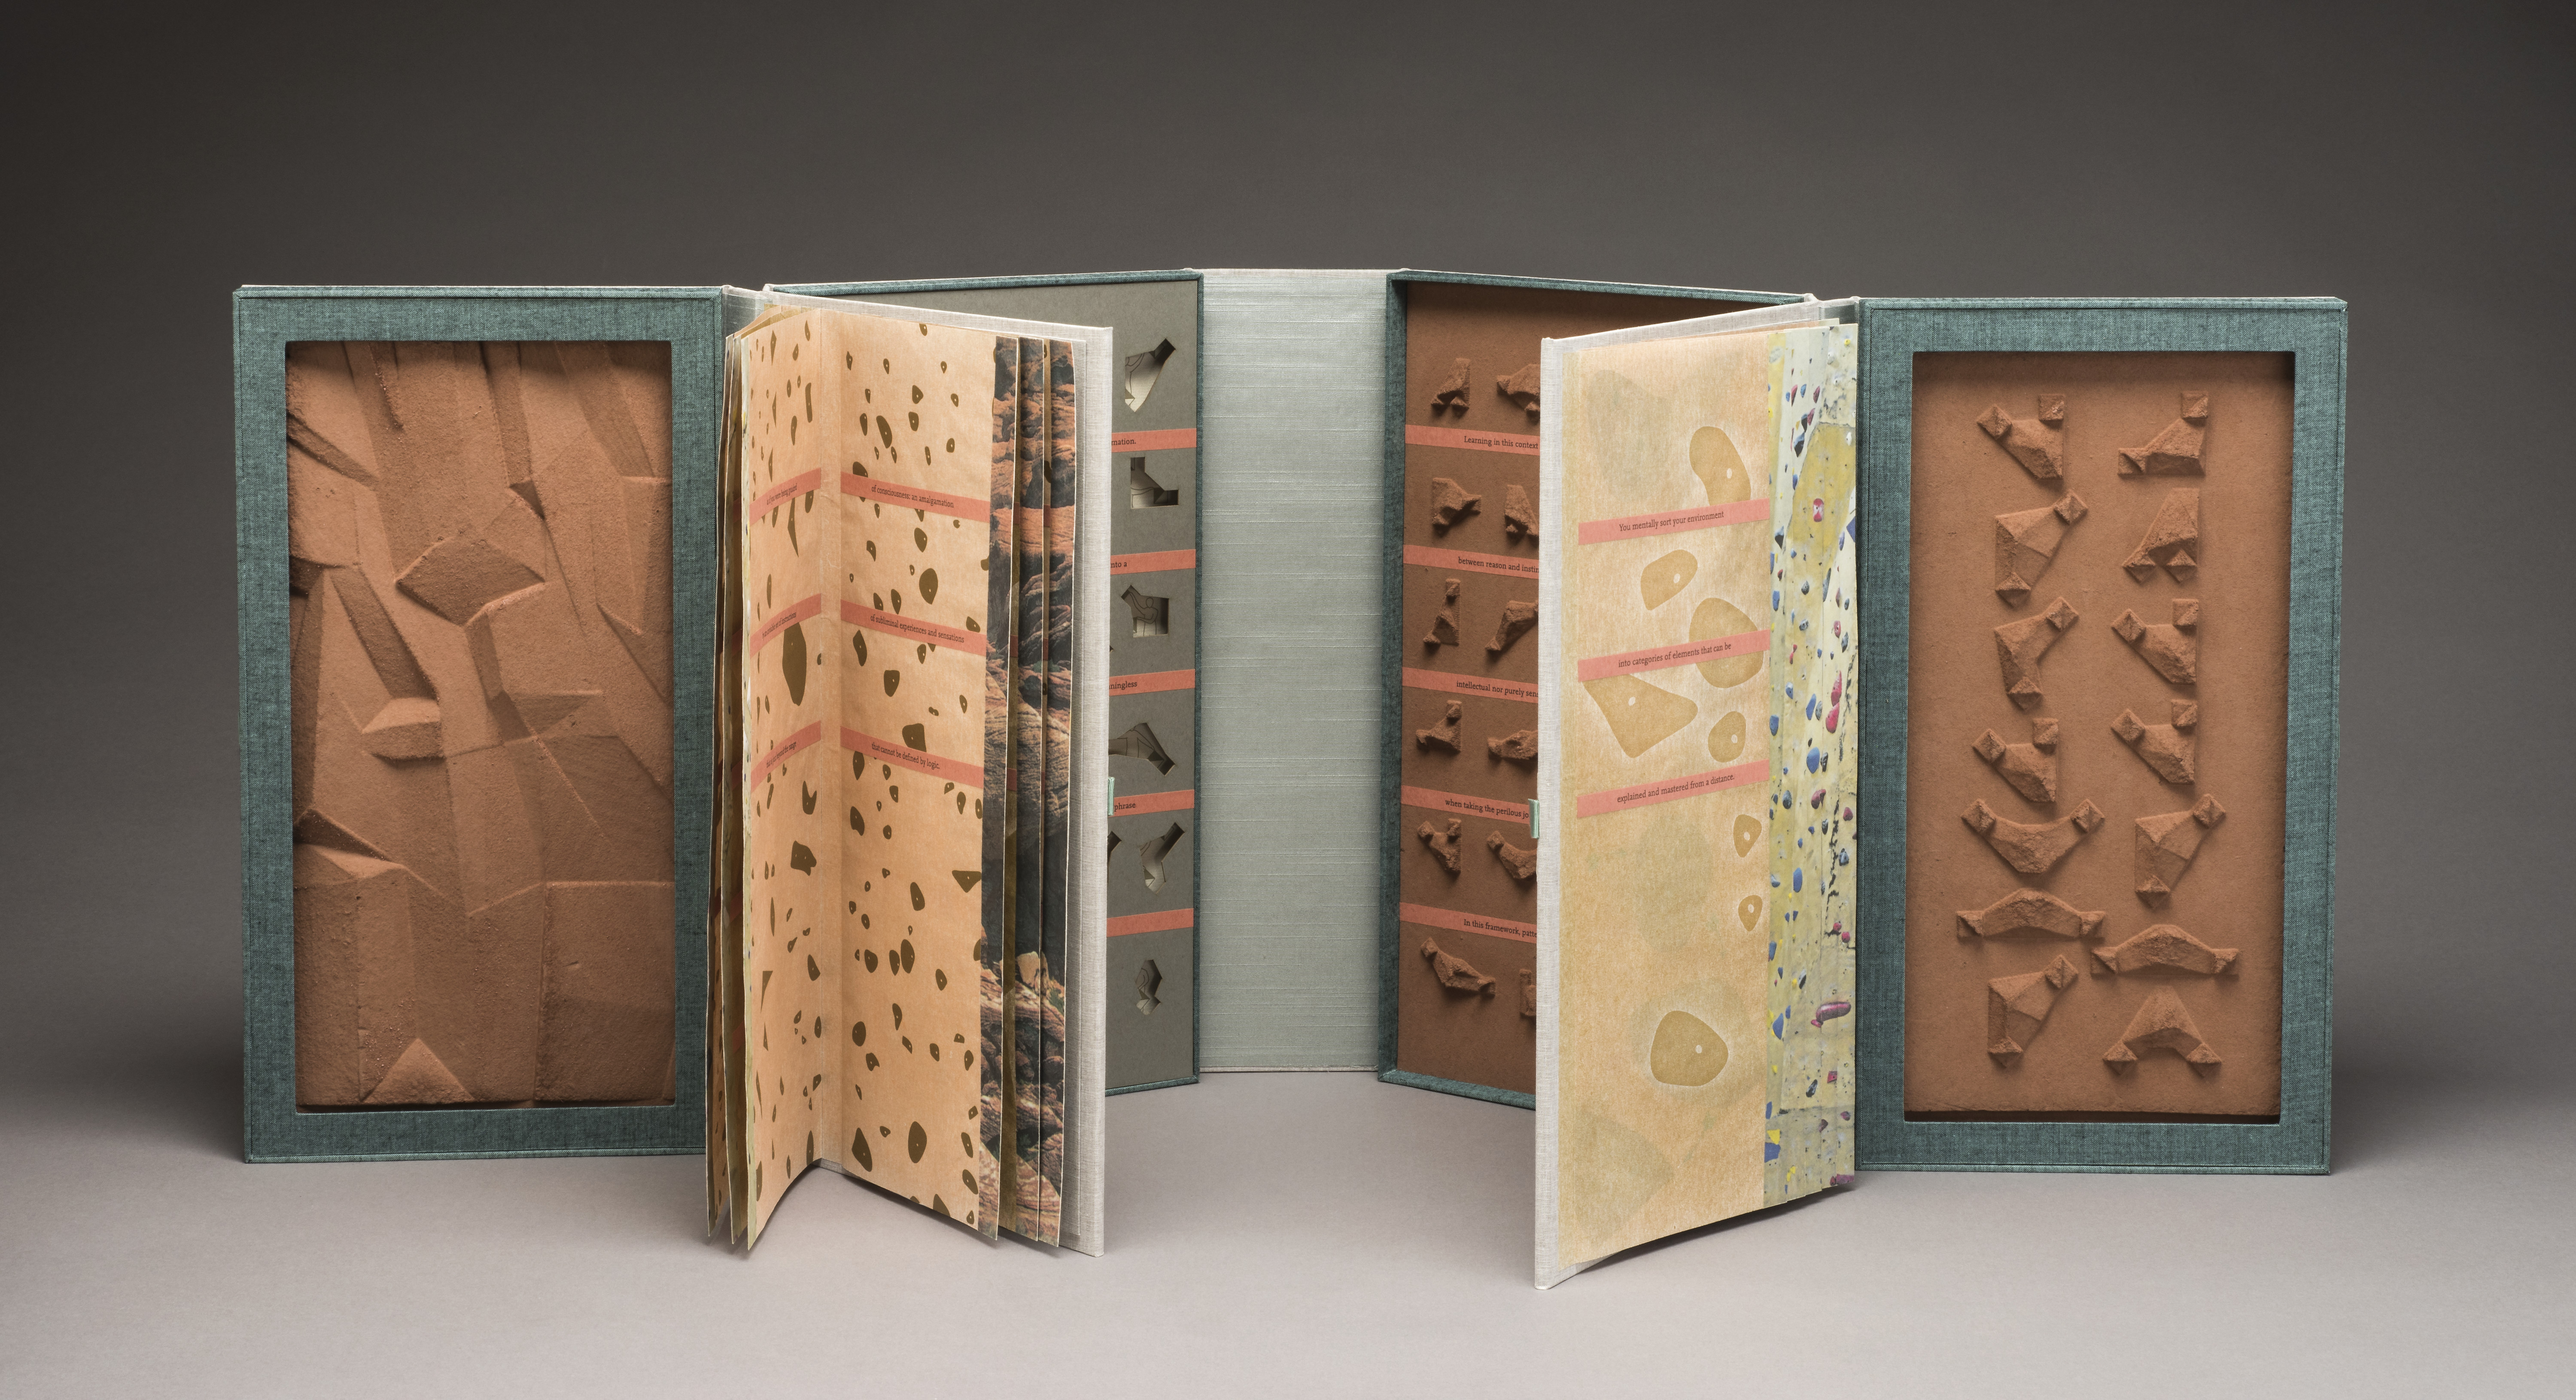 An open artist’s book resembling two open books connected end to end. The four inner cover panels feature small sculpted brown shapes, small indented shapes, and a rocky-looking panel. The two groups of pages feature different patterns that resemble rock climbing walls.